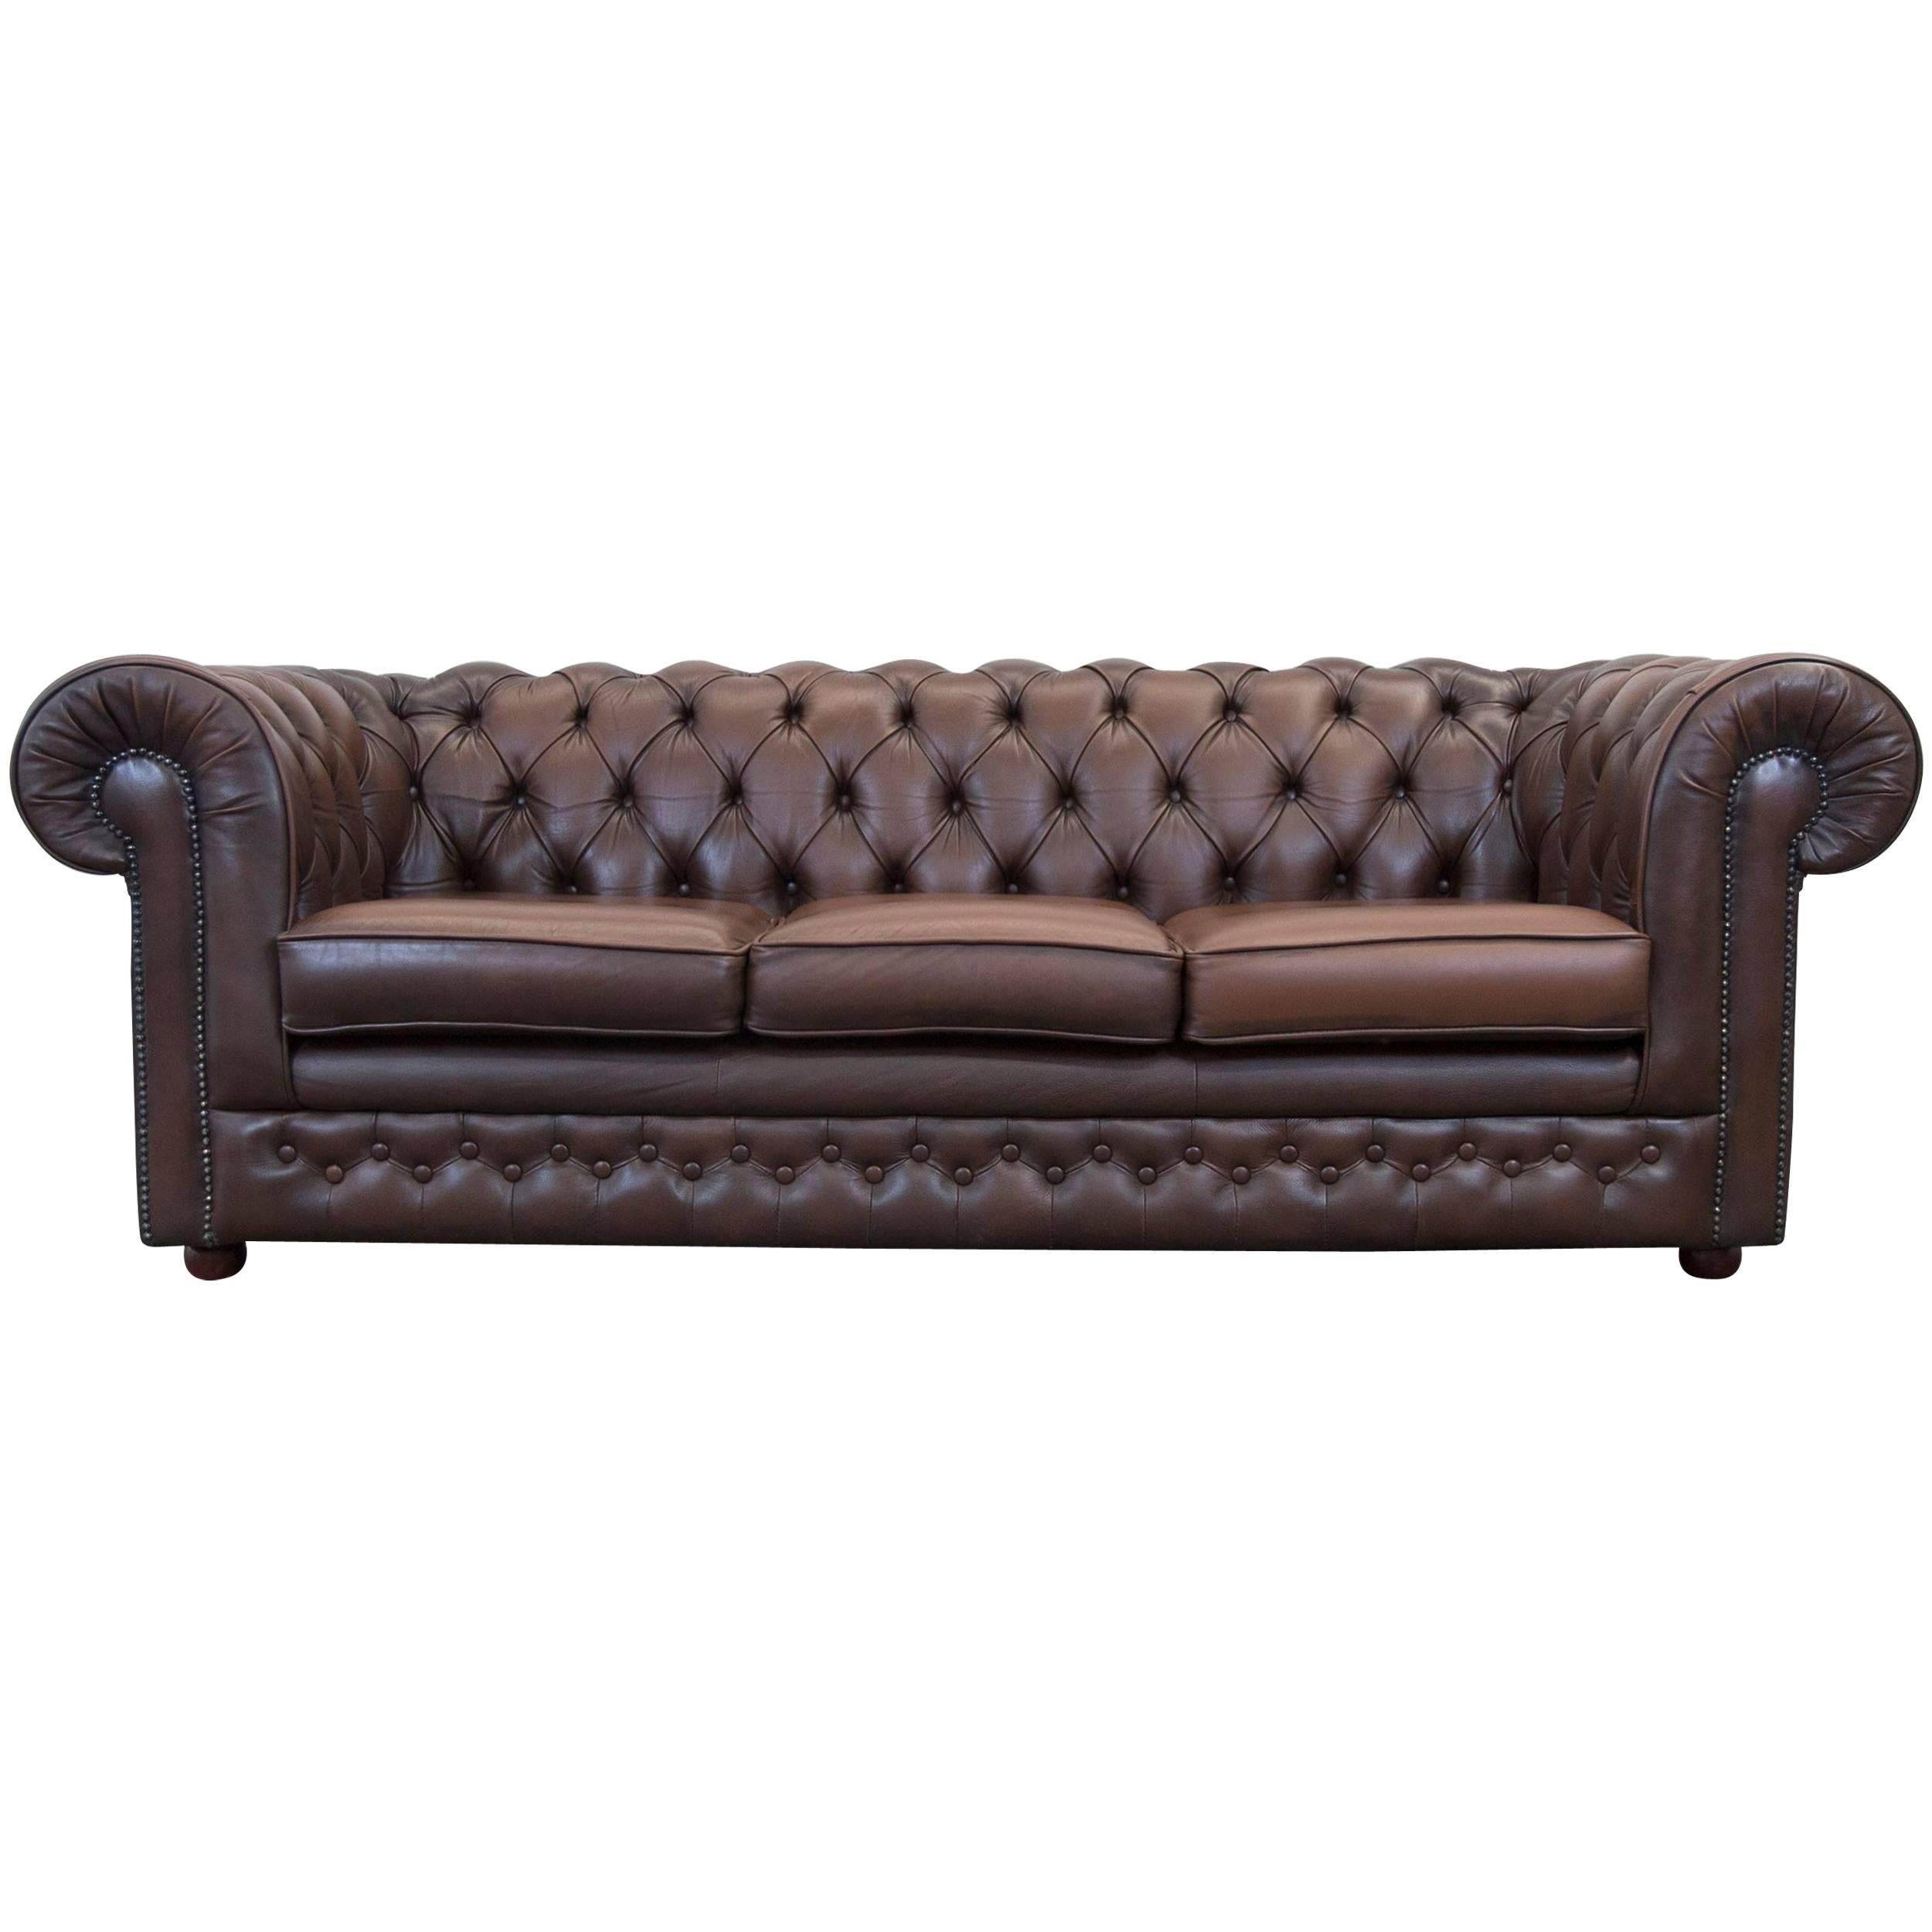 Thomas Lloyd Chesterfield Leather Sofa Brown Three-Seat Couch Vintage Retro